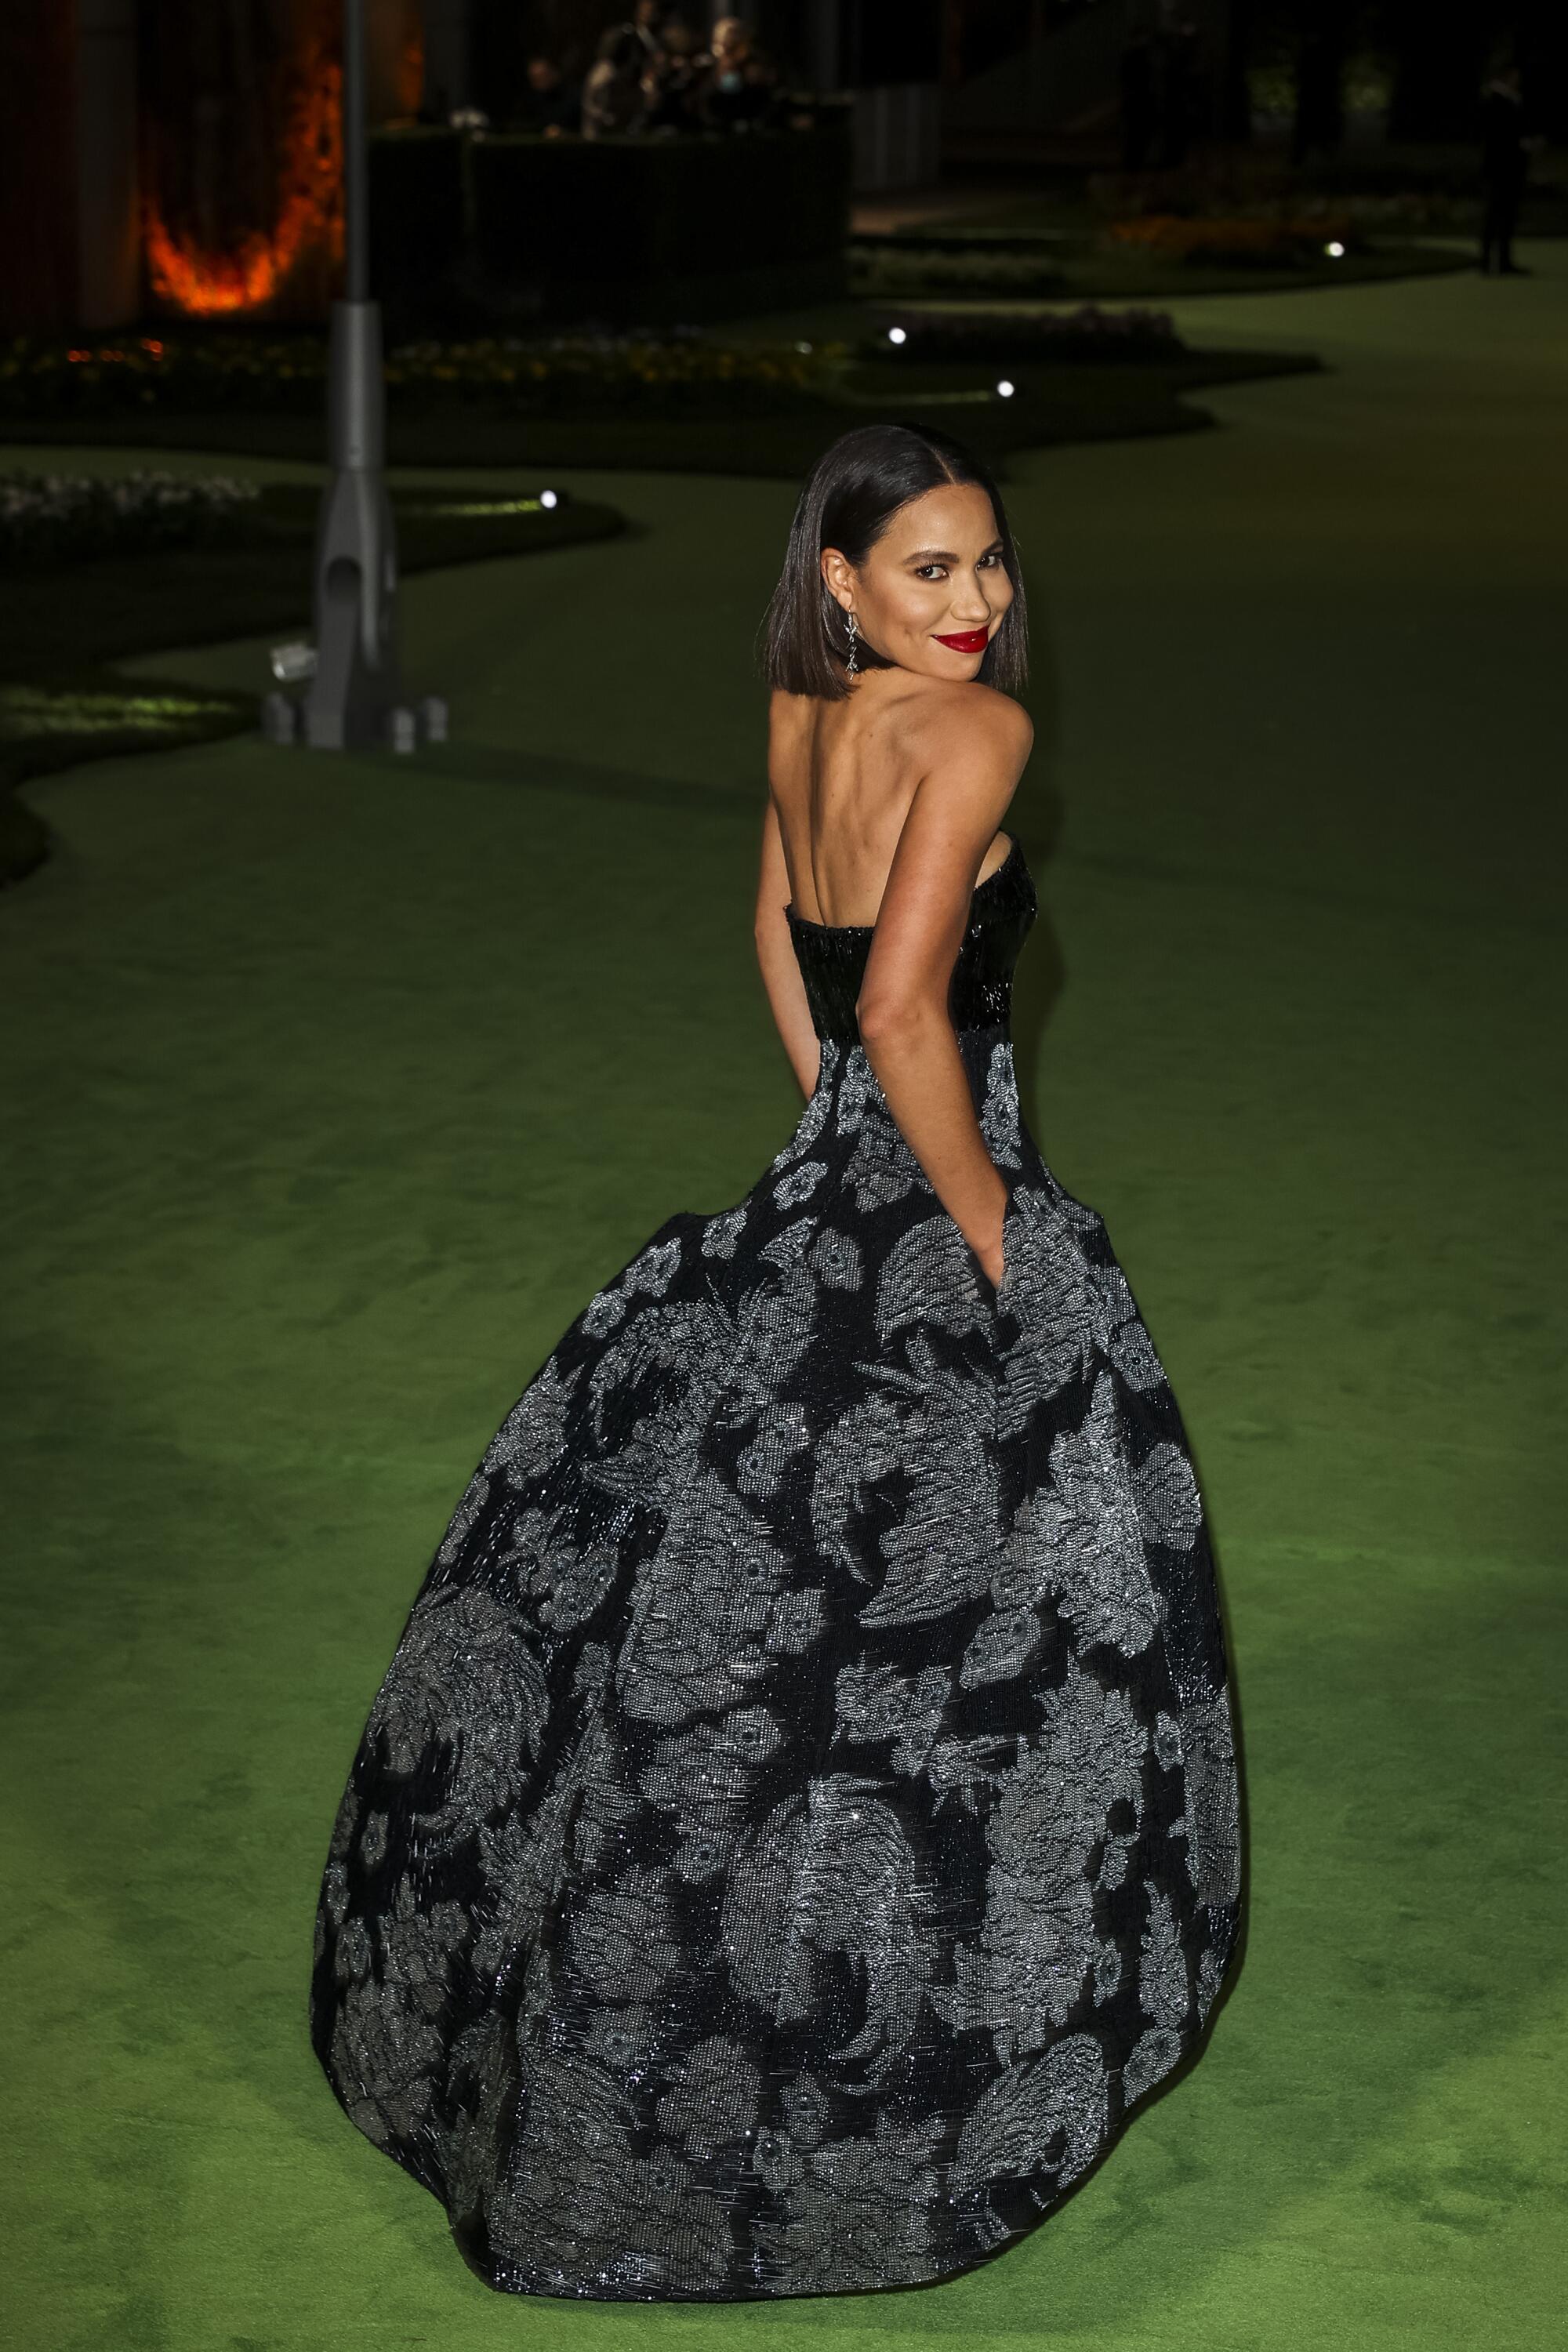 A woman in a patterned, black dress posing on a green carpet